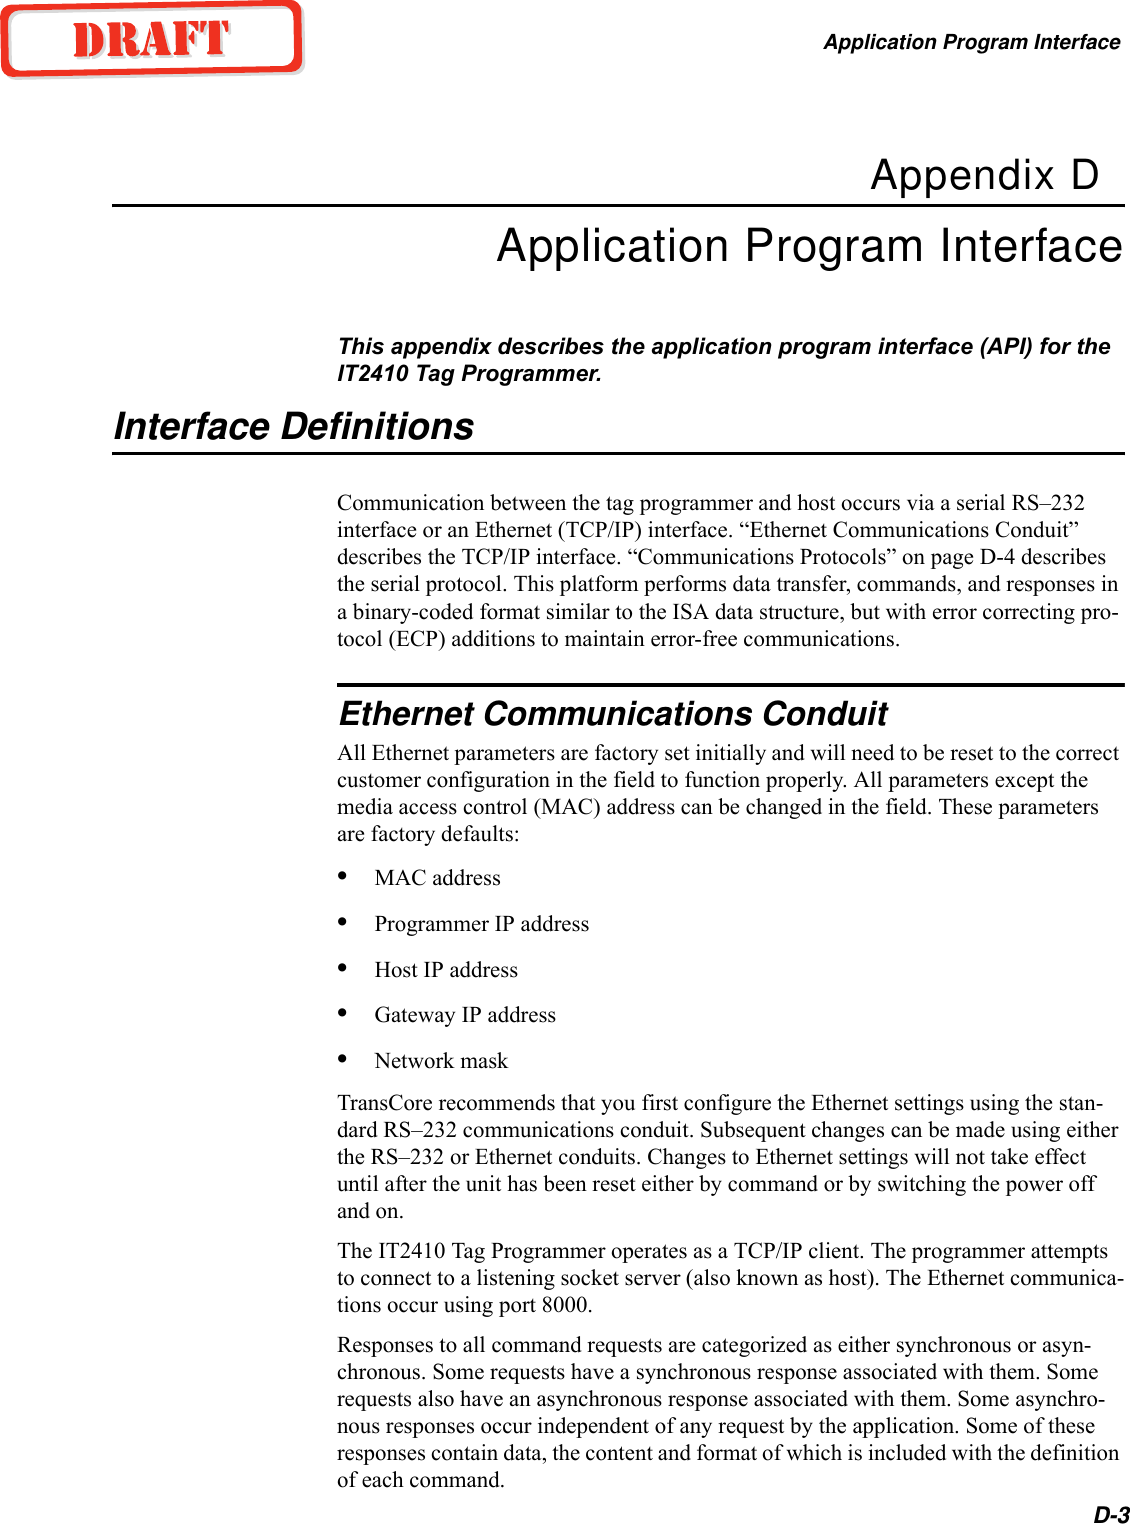 Application Program InterfaceD-3Appendix DApplication Program InterfaceThis appendix describes the application program interface (API) for the IT2410 Tag Programmer.Interface DefinitionsCommunication between the tag programmer and host occurs via a serial RS–232 interface or an Ethernet (TCP/IP) interface. “Ethernet Communications Conduit” describes the TCP/IP interface. “Communications Protocols” on page D-4 describes the serial protocol. This platform performs data transfer, commands, and responses in a binary-coded format similar to the ISA data structure, but with error correcting pro-tocol (ECP) additions to maintain error-free communications.Ethernet Communications ConduitAll Ethernet parameters are factory set initially and will need to be reset to the correct customer configuration in the field to function properly. All parameters except the media access control (MAC) address can be changed in the field. These parameters are factory defaults:•MAC address•Programmer IP address•Host IP address•Gateway IP address•Network maskTransCore recommends that you first configure the Ethernet settings using the stan-dard RS–232 communications conduit. Subsequent changes can be made using either the RS–232 or Ethernet conduits. Changes to Ethernet settings will not take effect until after the unit has been reset either by command or by switching the power off and on.The IT2410 Tag Programmer operates as a TCP/IP client. The programmer attempts to connect to a listening socket server (also known as host). The Ethernet communica-tions occur using port 8000.Responses to all command requests are categorized as either synchronous or asyn-chronous. Some requests have a synchronous response associated with them. Some requests also have an asynchronous response associated with them. Some asynchro-nous responses occur independent of any request by the application. Some of these responses contain data, the content and format of which is included with the definition of each command.